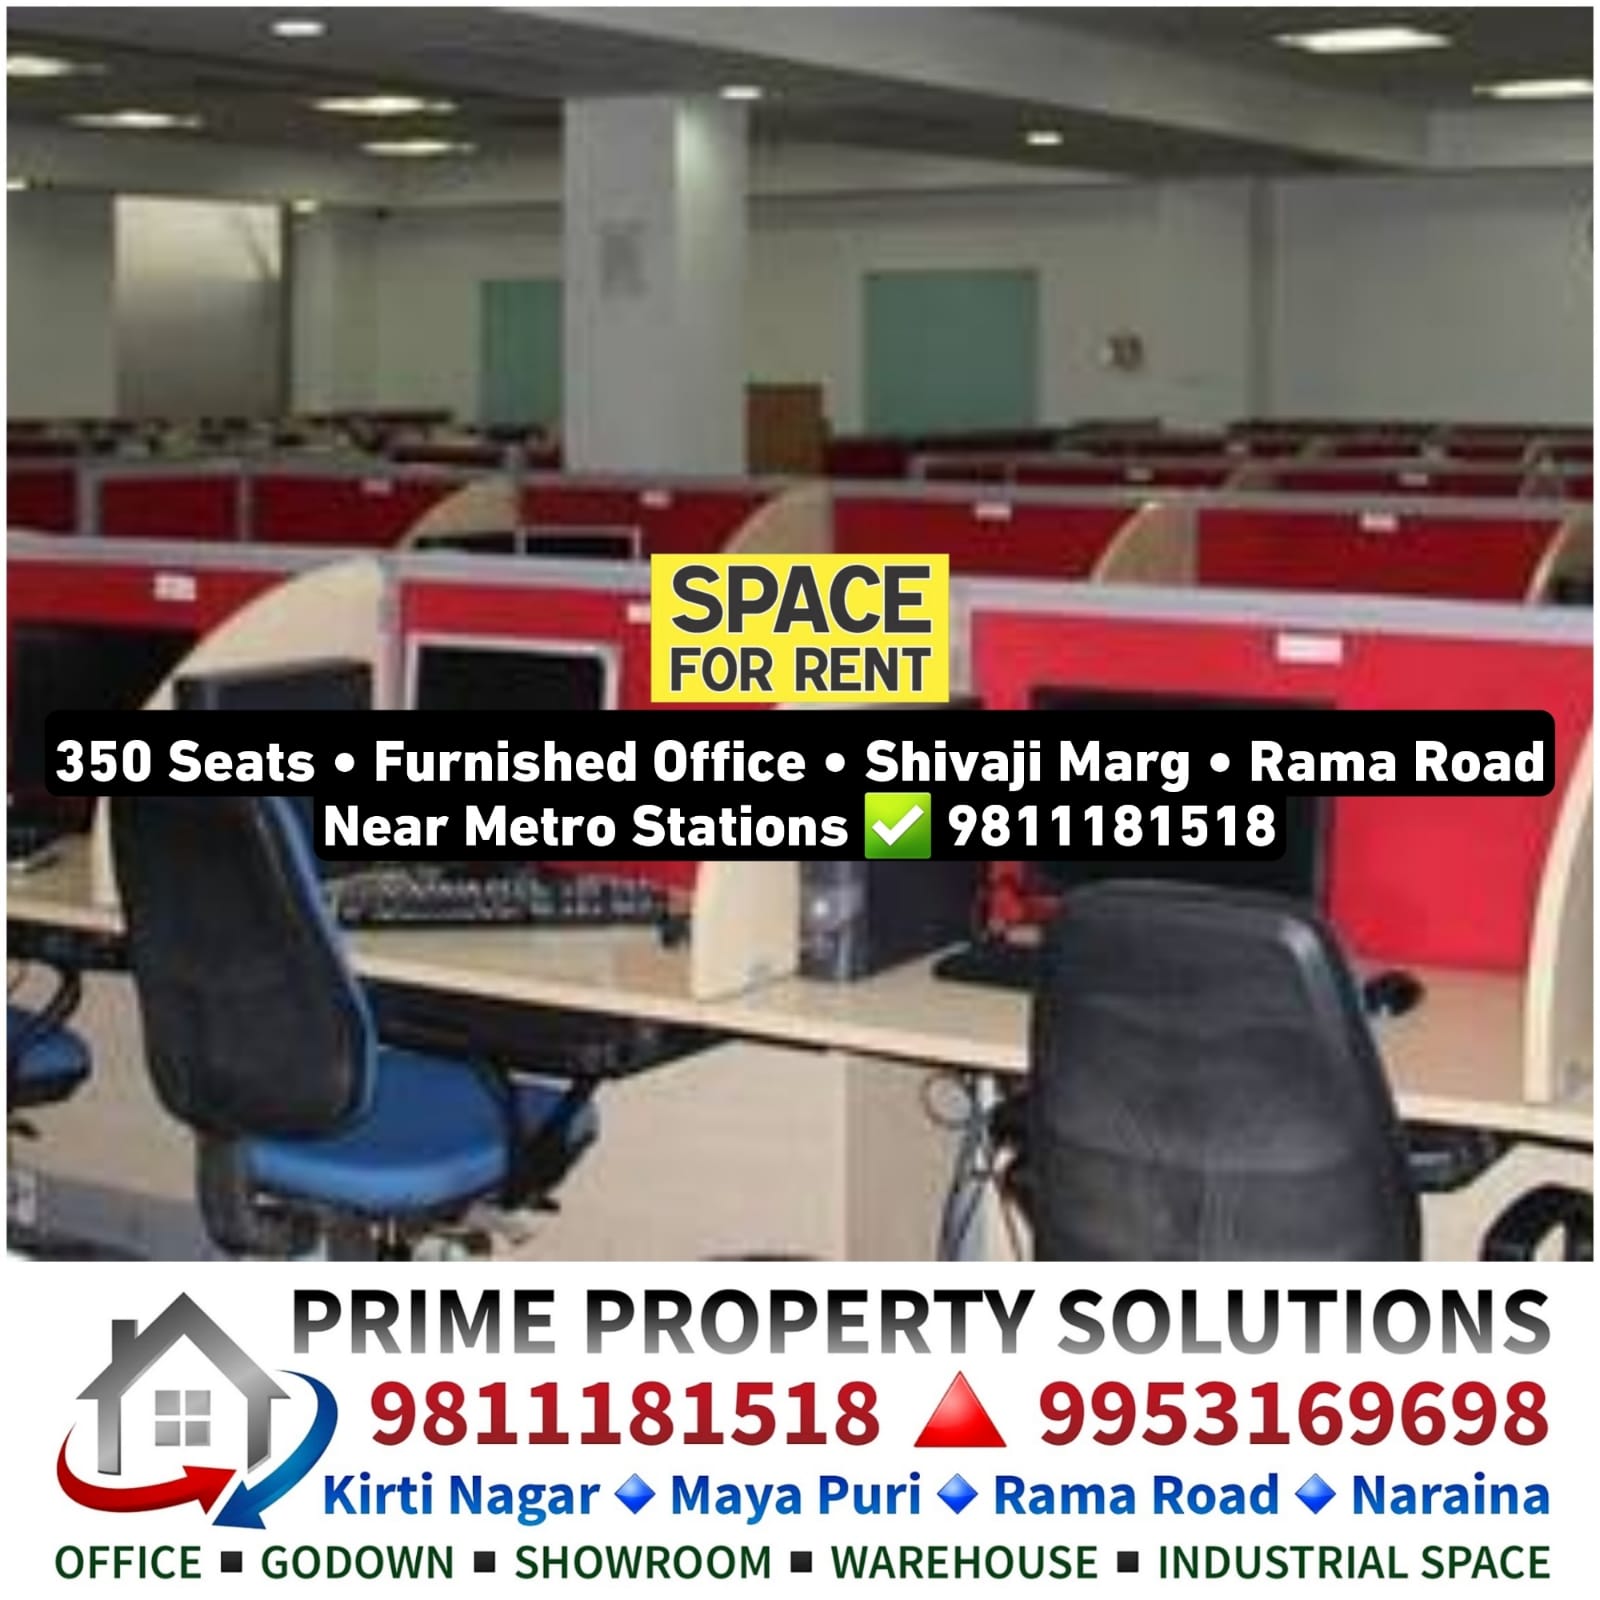 Sale/Purchase and Rent/Lease of Office Spaces, Shops, Showrooms, Warehouses / Godowns, Apartments / Flats, Multipurpose Buildings, Industrial Plots / Lands, Industrial Buildings